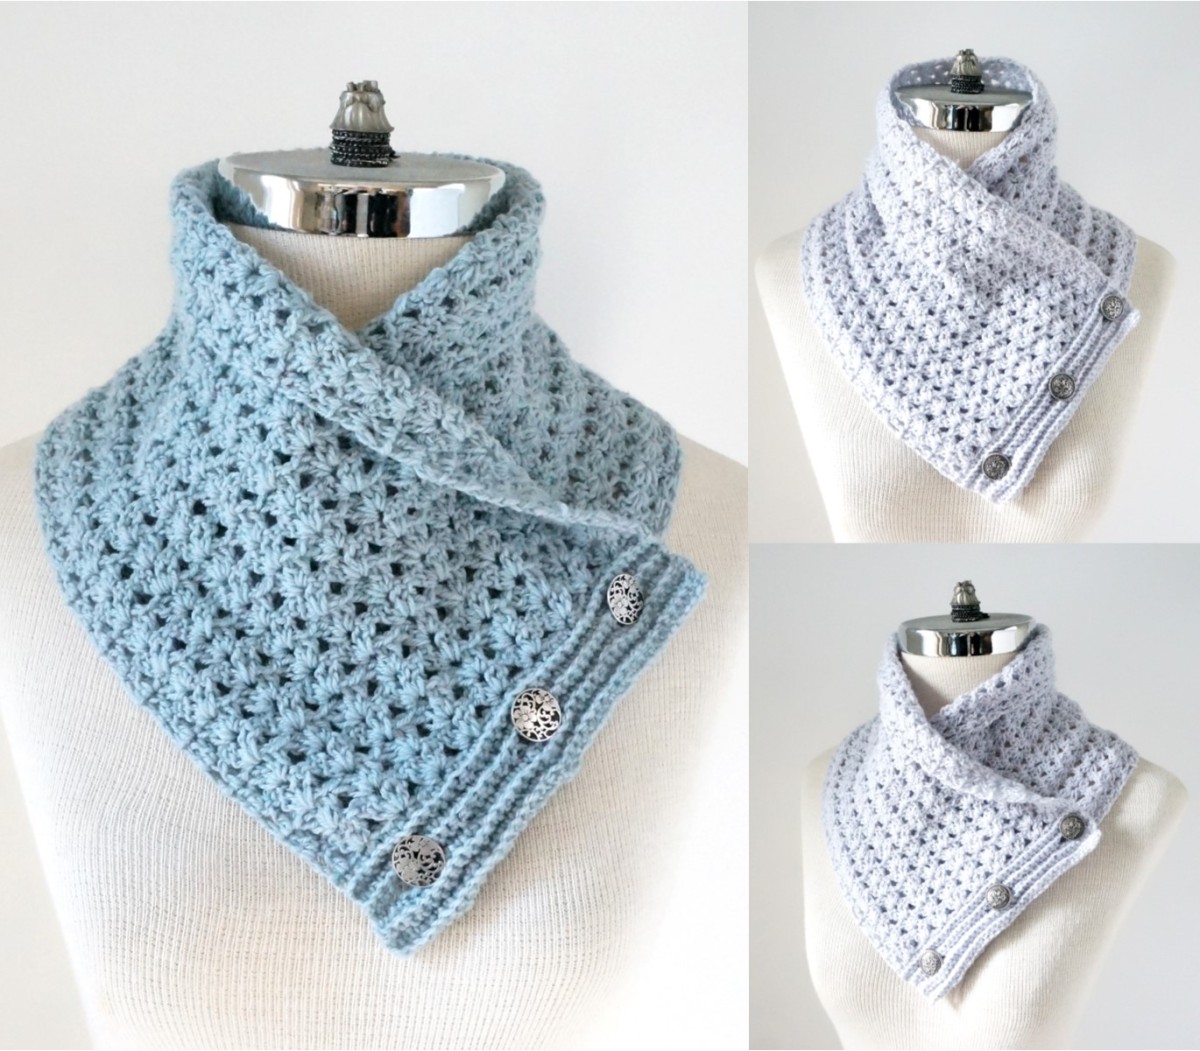 New Crochet Pattern:  Ashley Lace Scarf is perfect for any style with the contemporary lace design.